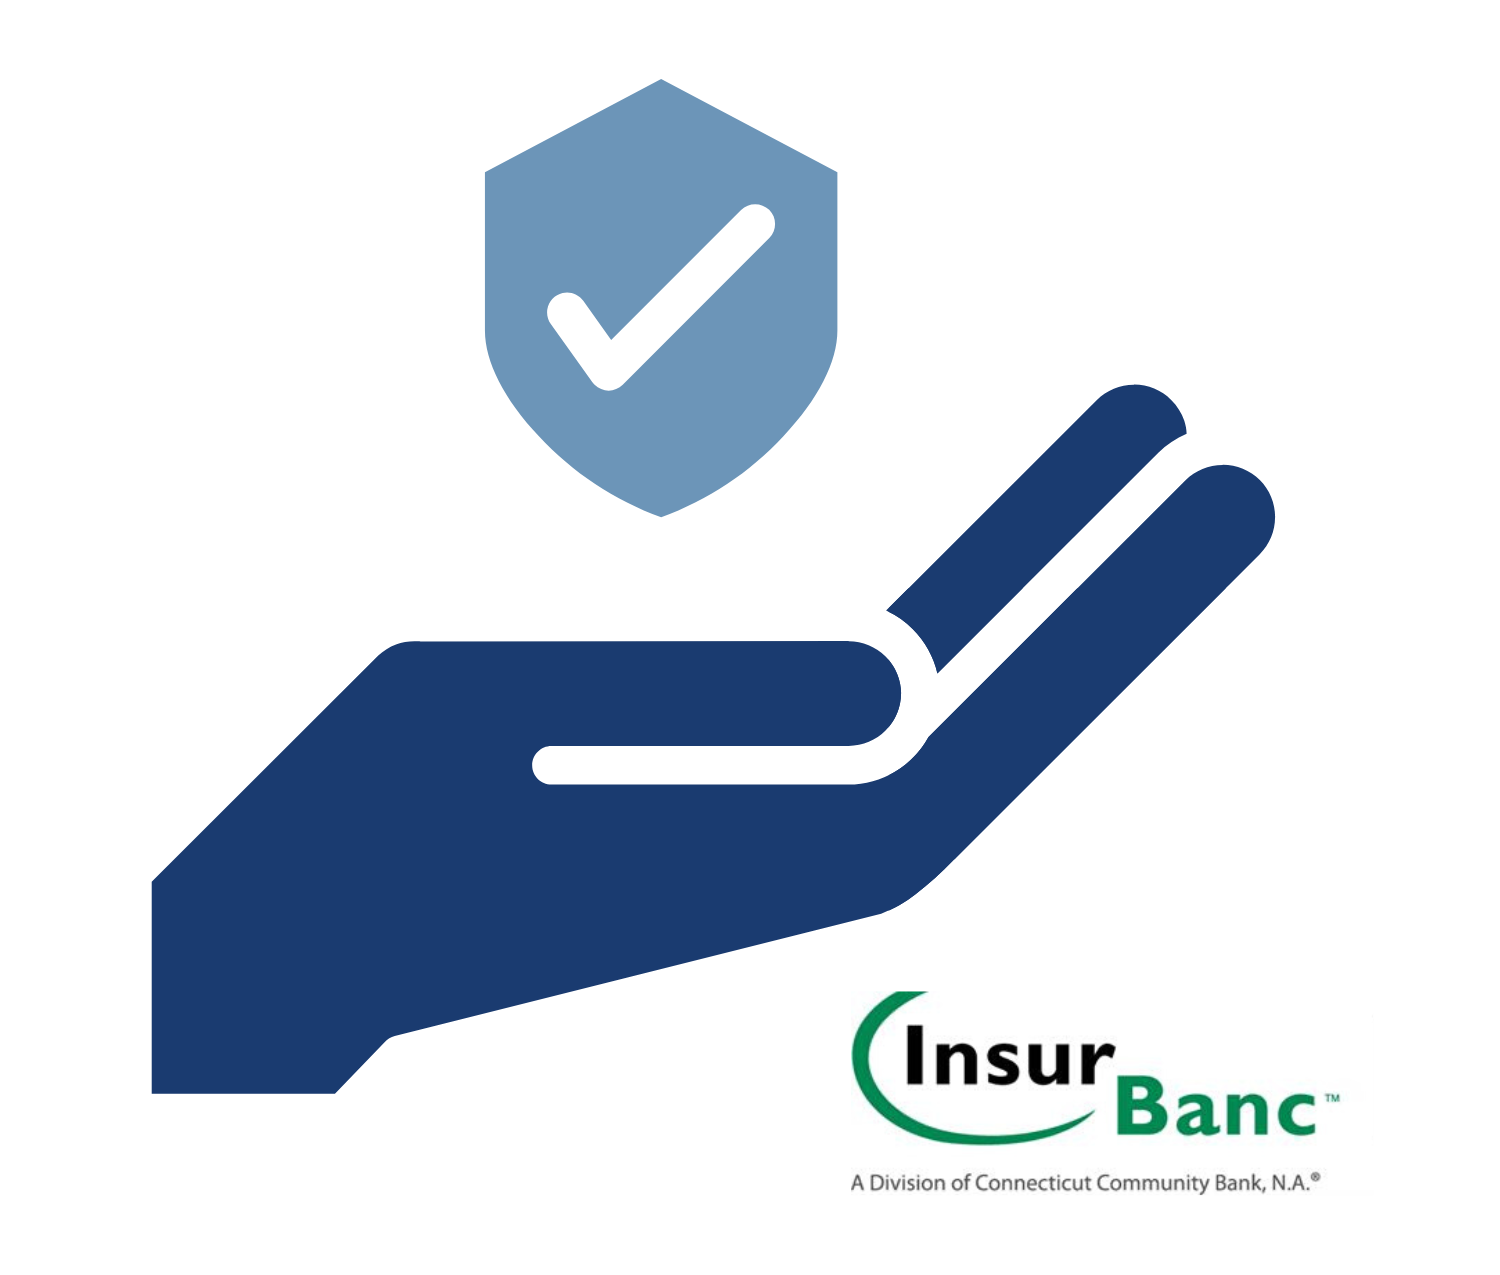 InsurBanc for Independent Agencies